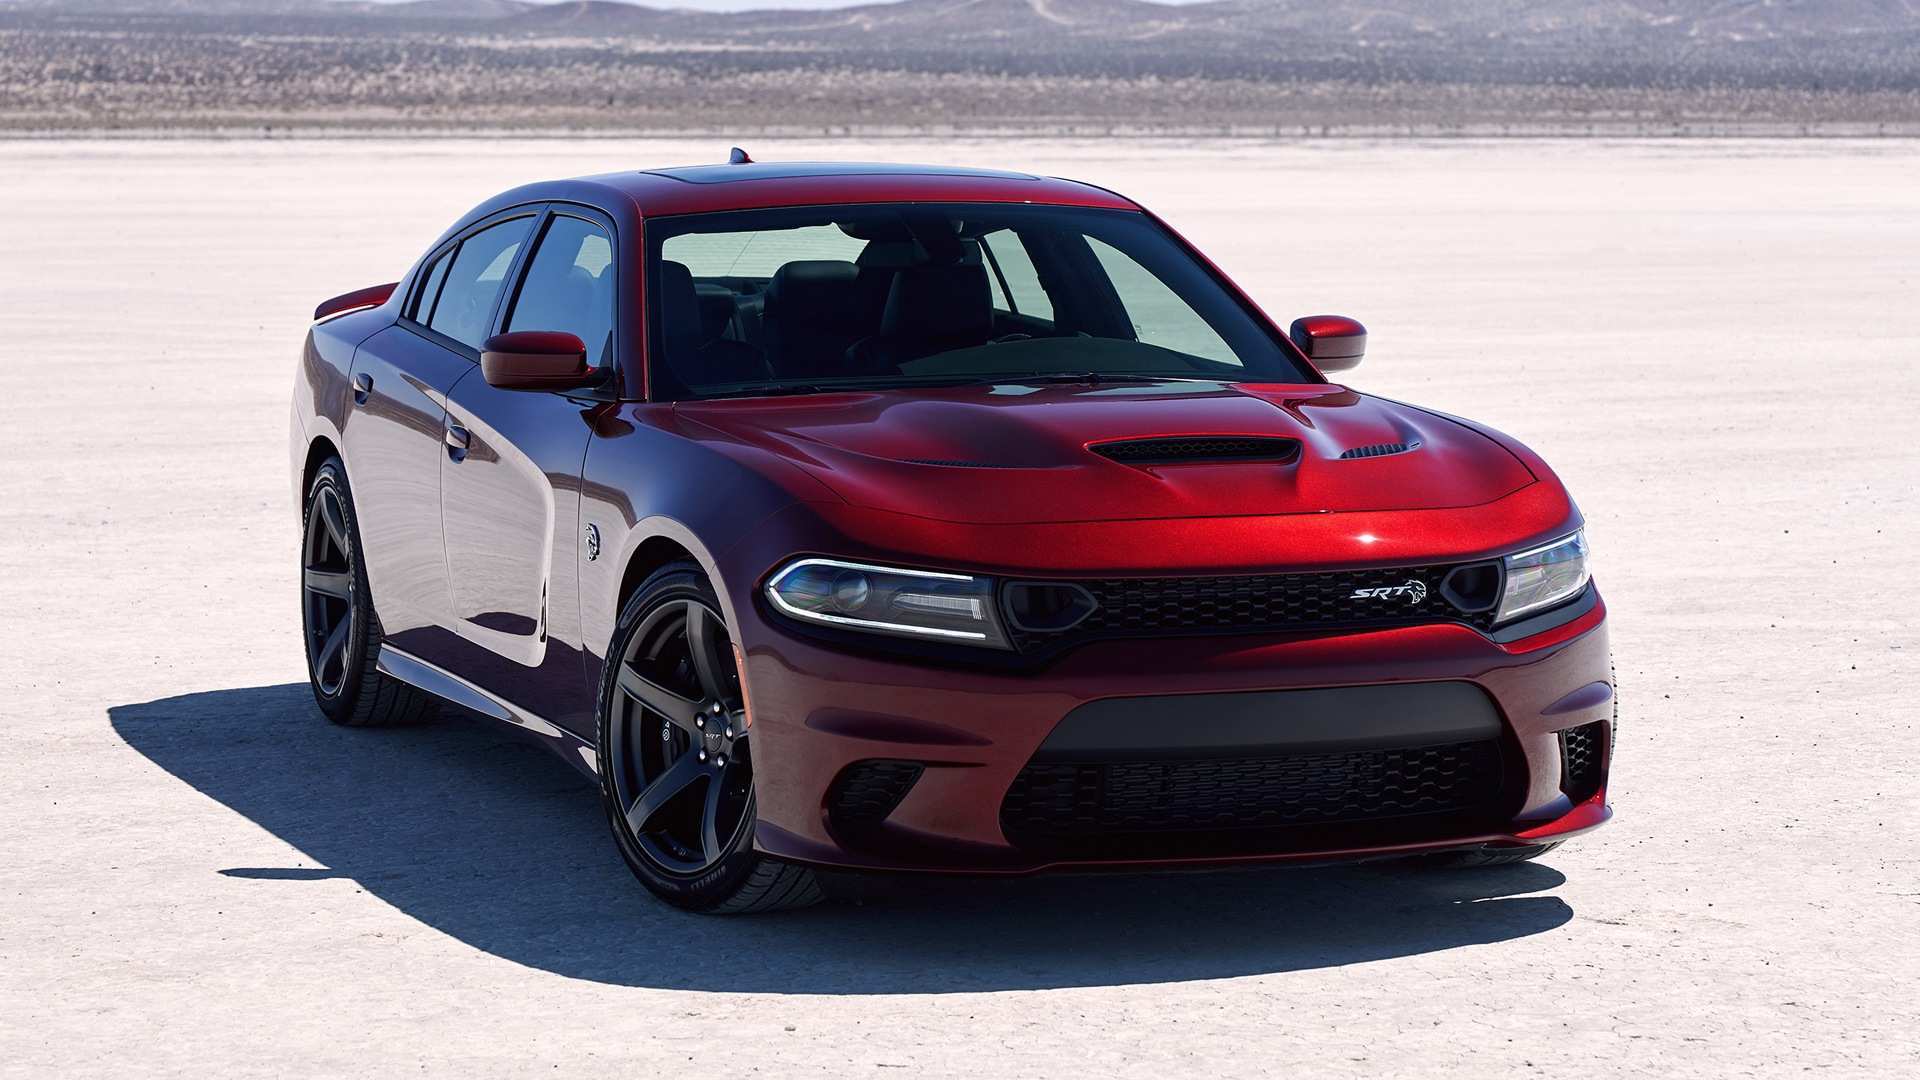 New 2020 Dodge Charger Hellcat Wallpaper by 2020 Dodge Charger